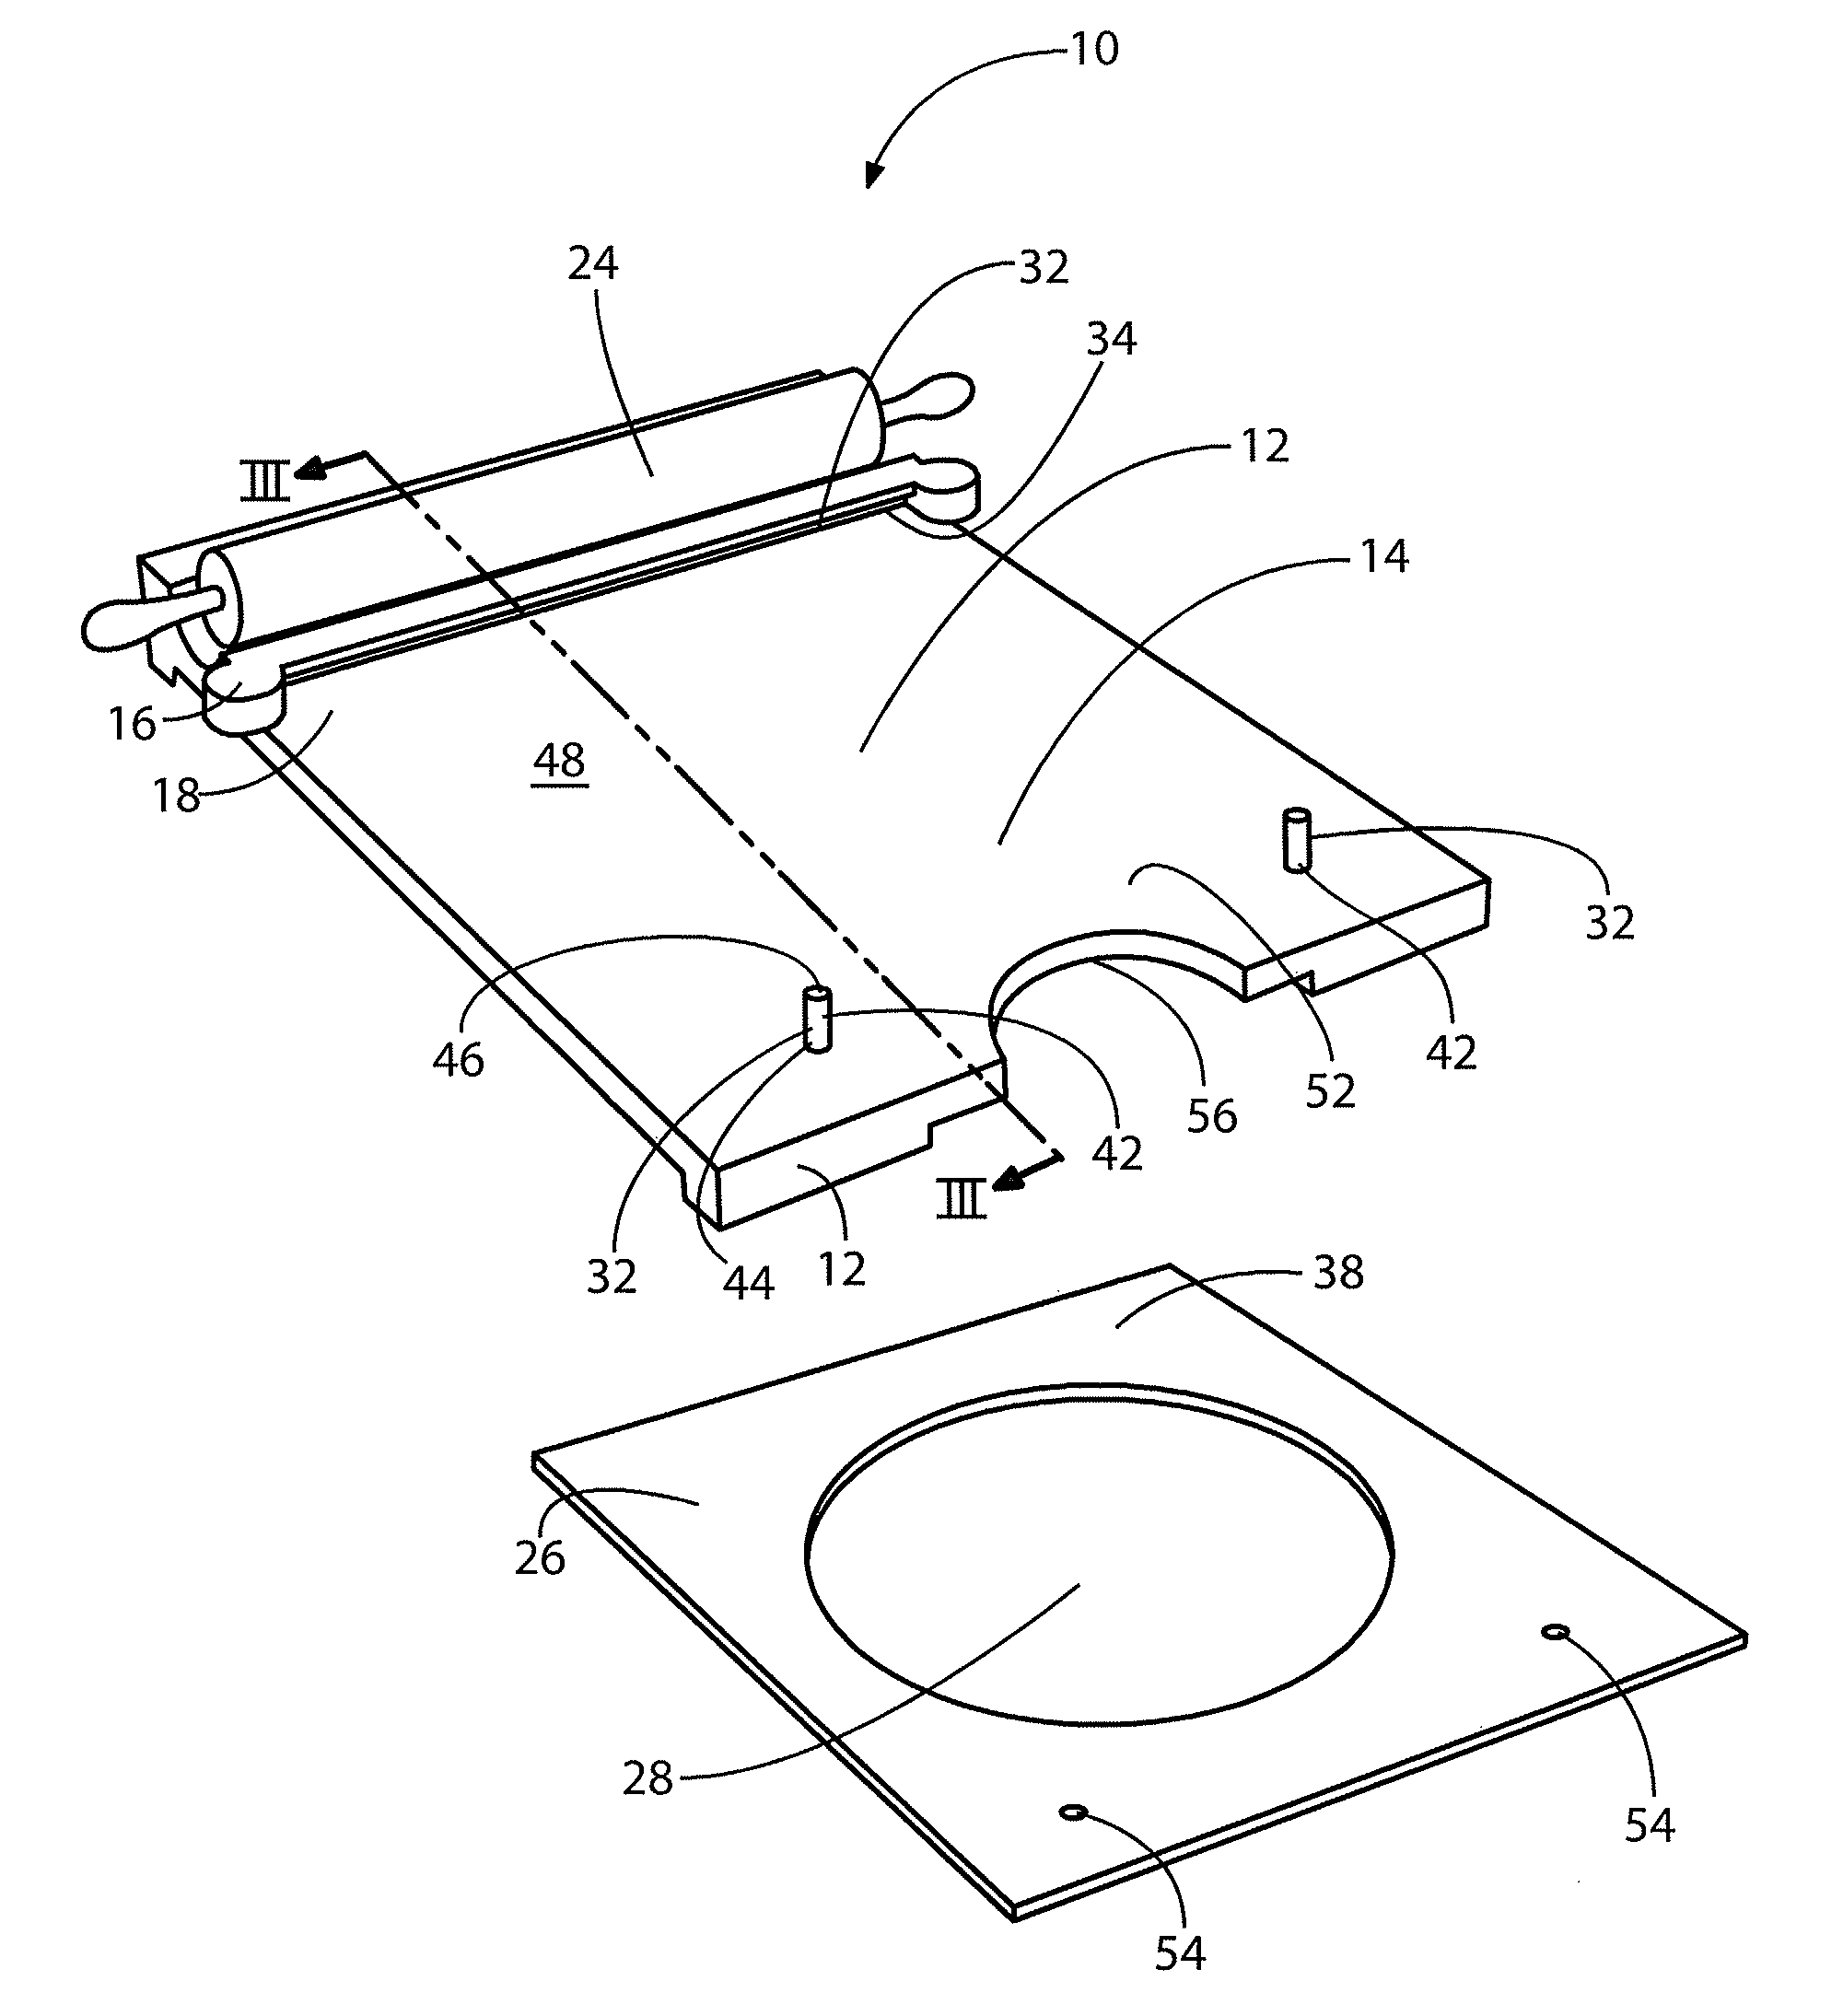 Dough shaping device and kit